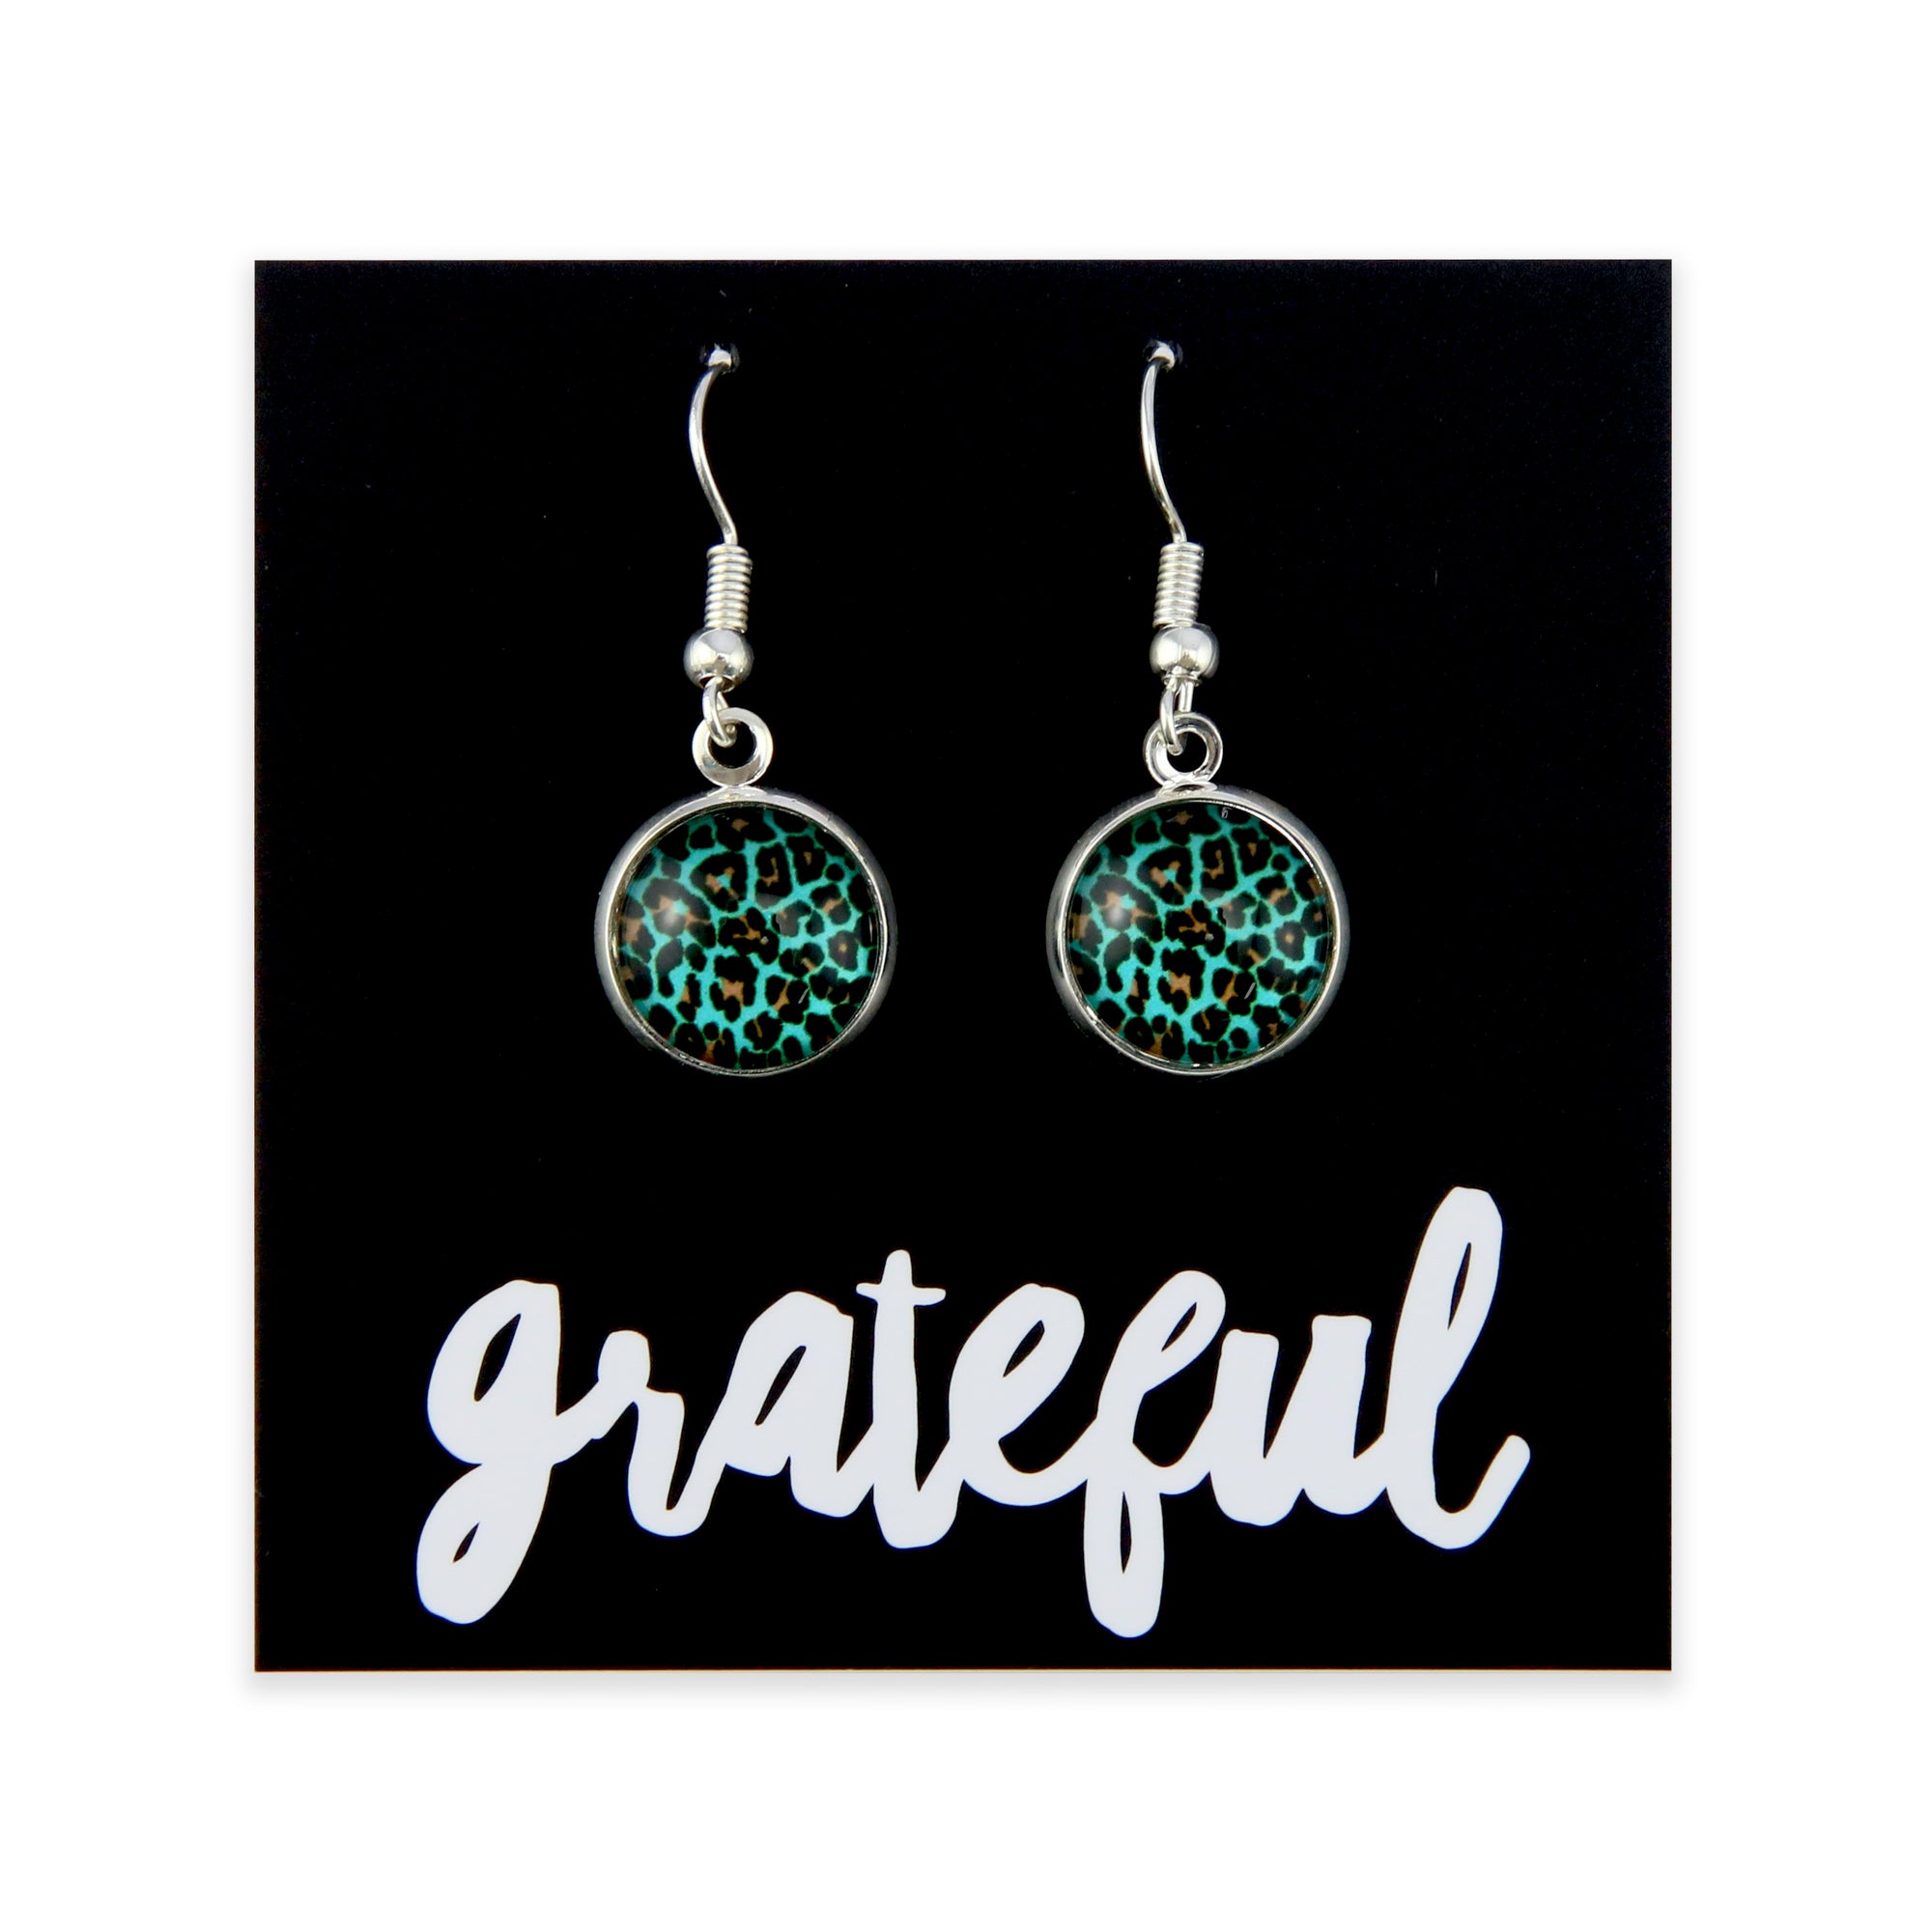 TEAL COLLECTION - Grateful - Bright Silver Dangle Earrings - Lagoon Leopard (11754)